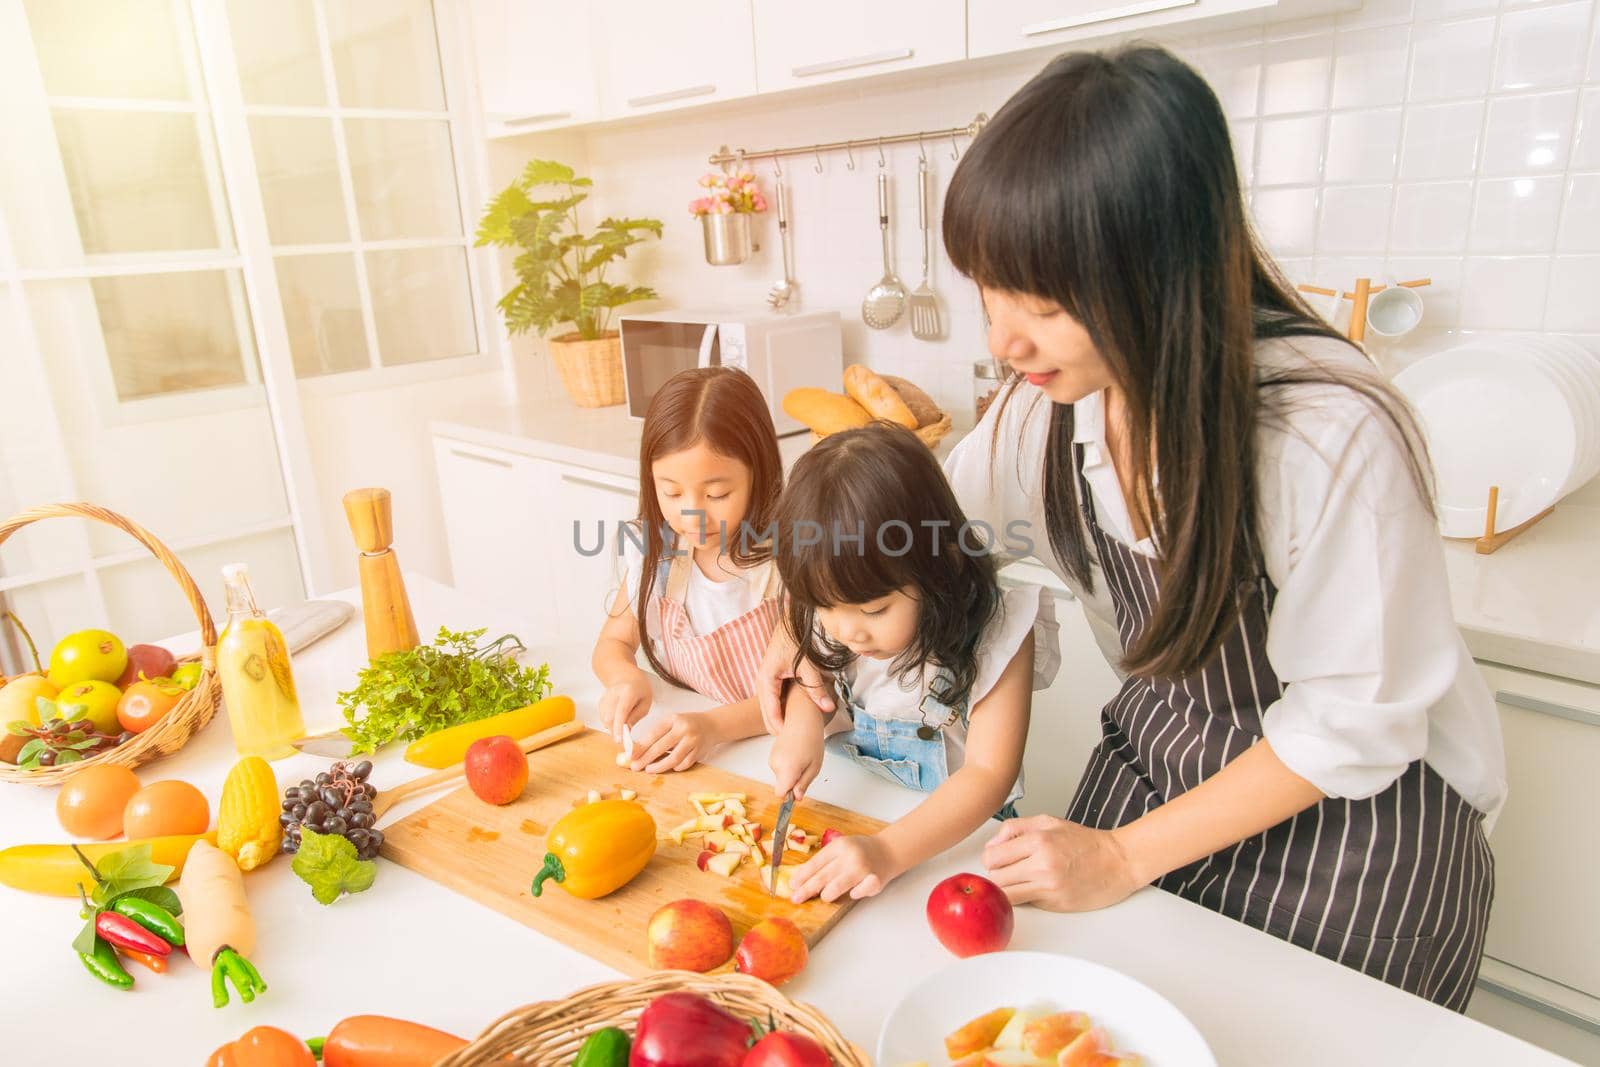 Girl child enjoy playing cut apple together with mother and sister at home kitchen.